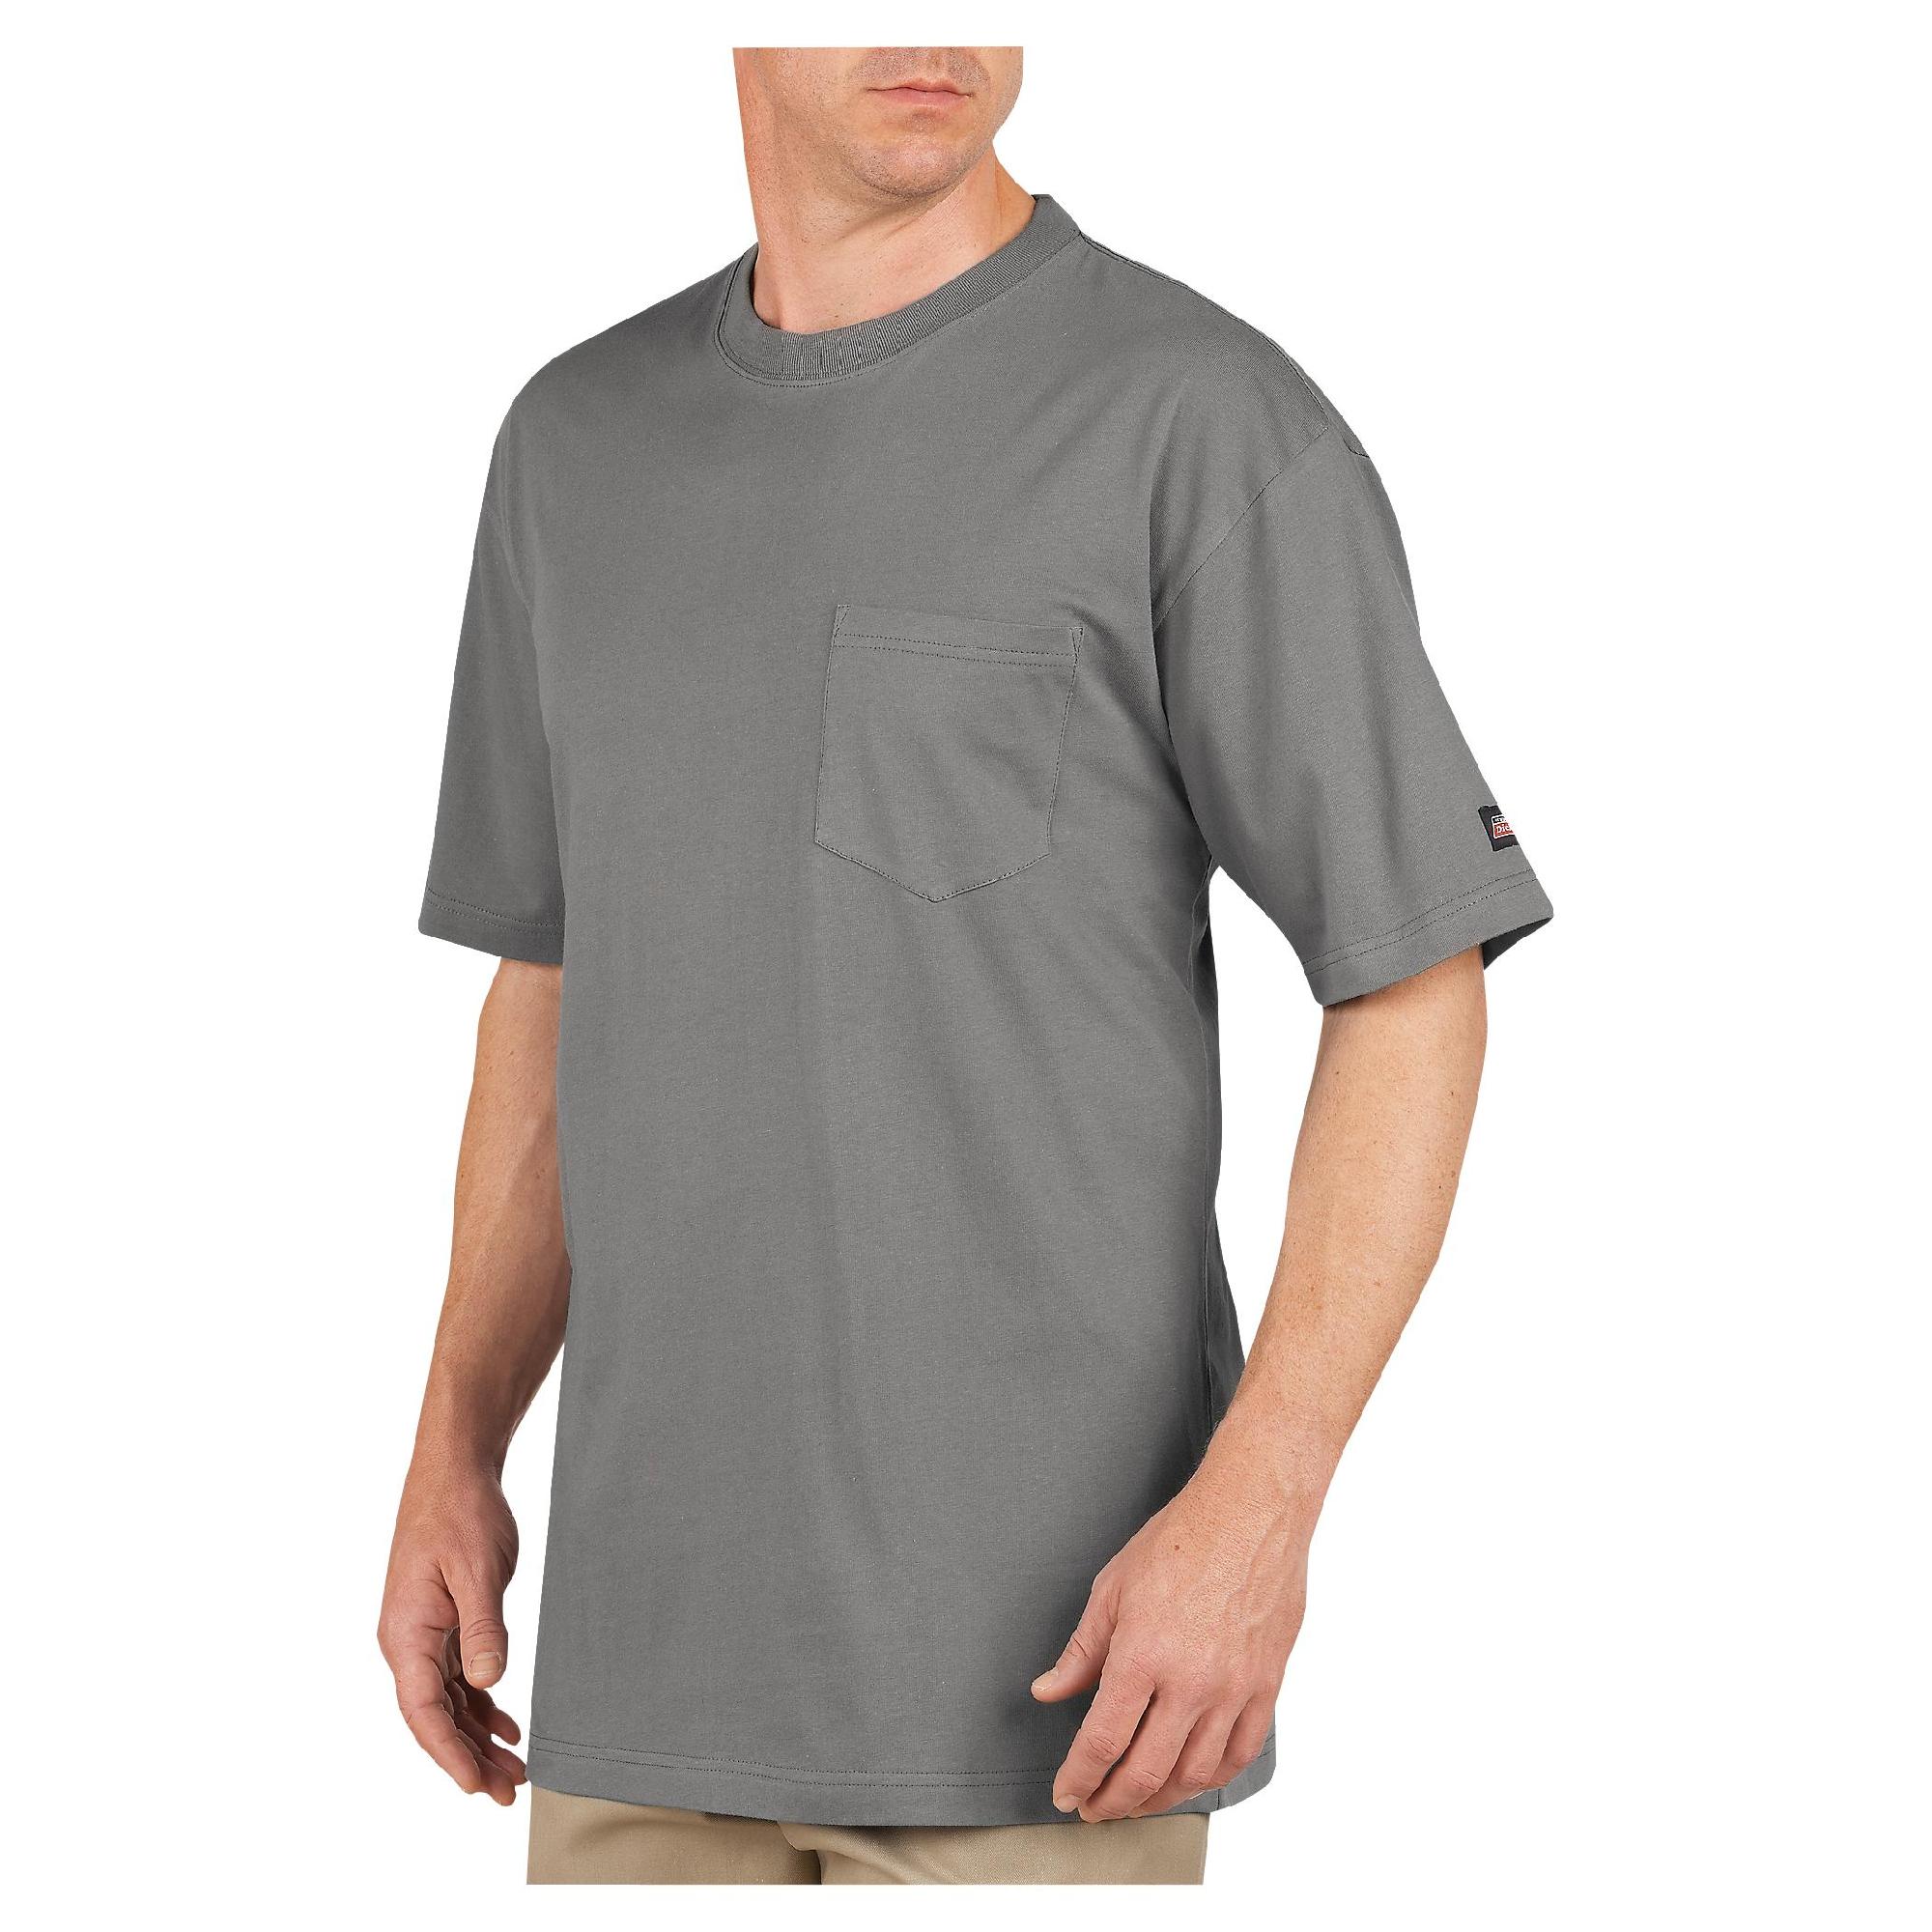 Genuine Dickies Pocket Tee PKGS407 - Clothing - Men's Clothing - Young ...